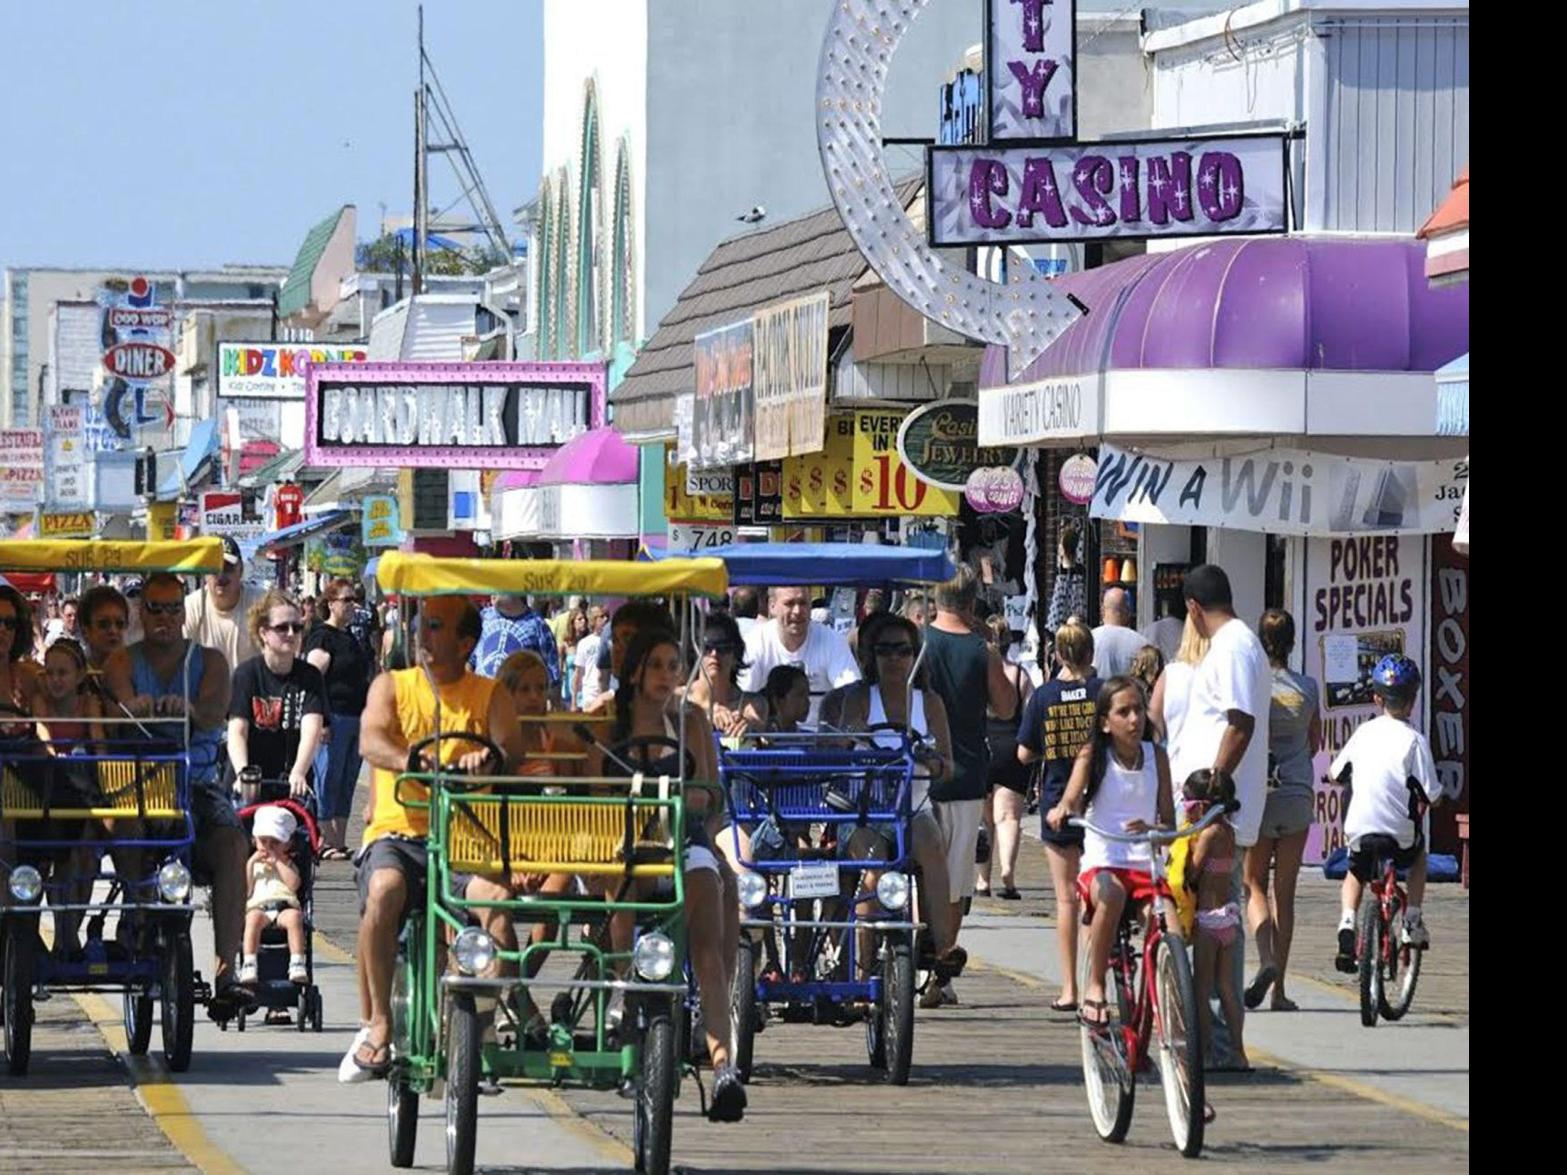 Wildwood bans alcohol on beach and boardwalks. For real this time., National News